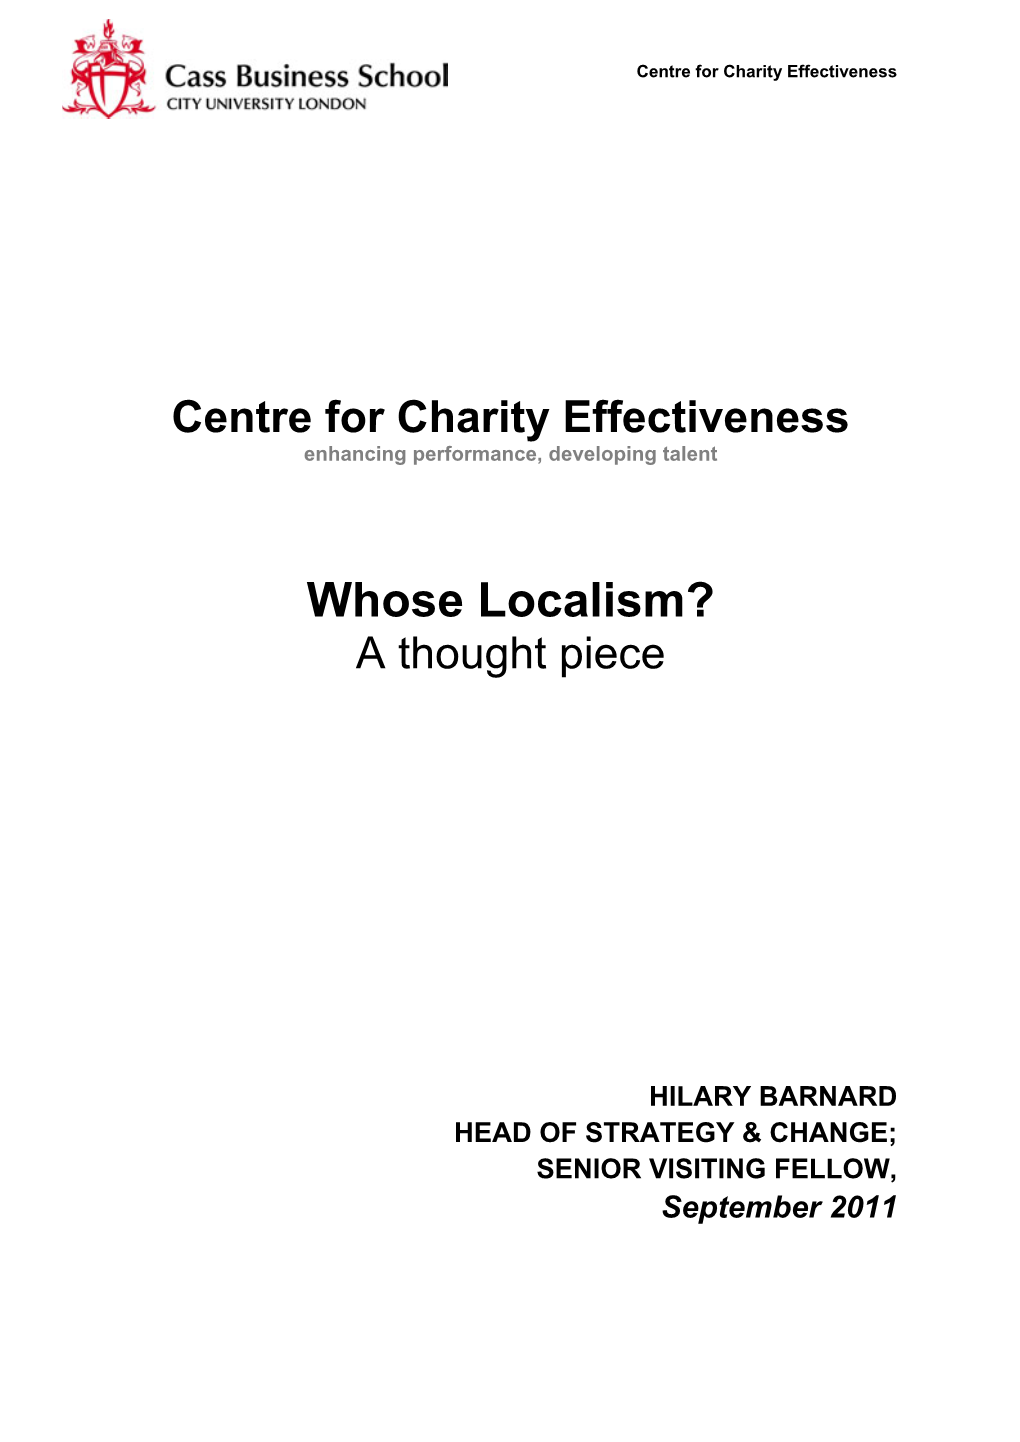 Whose Localism? a Thought Piece